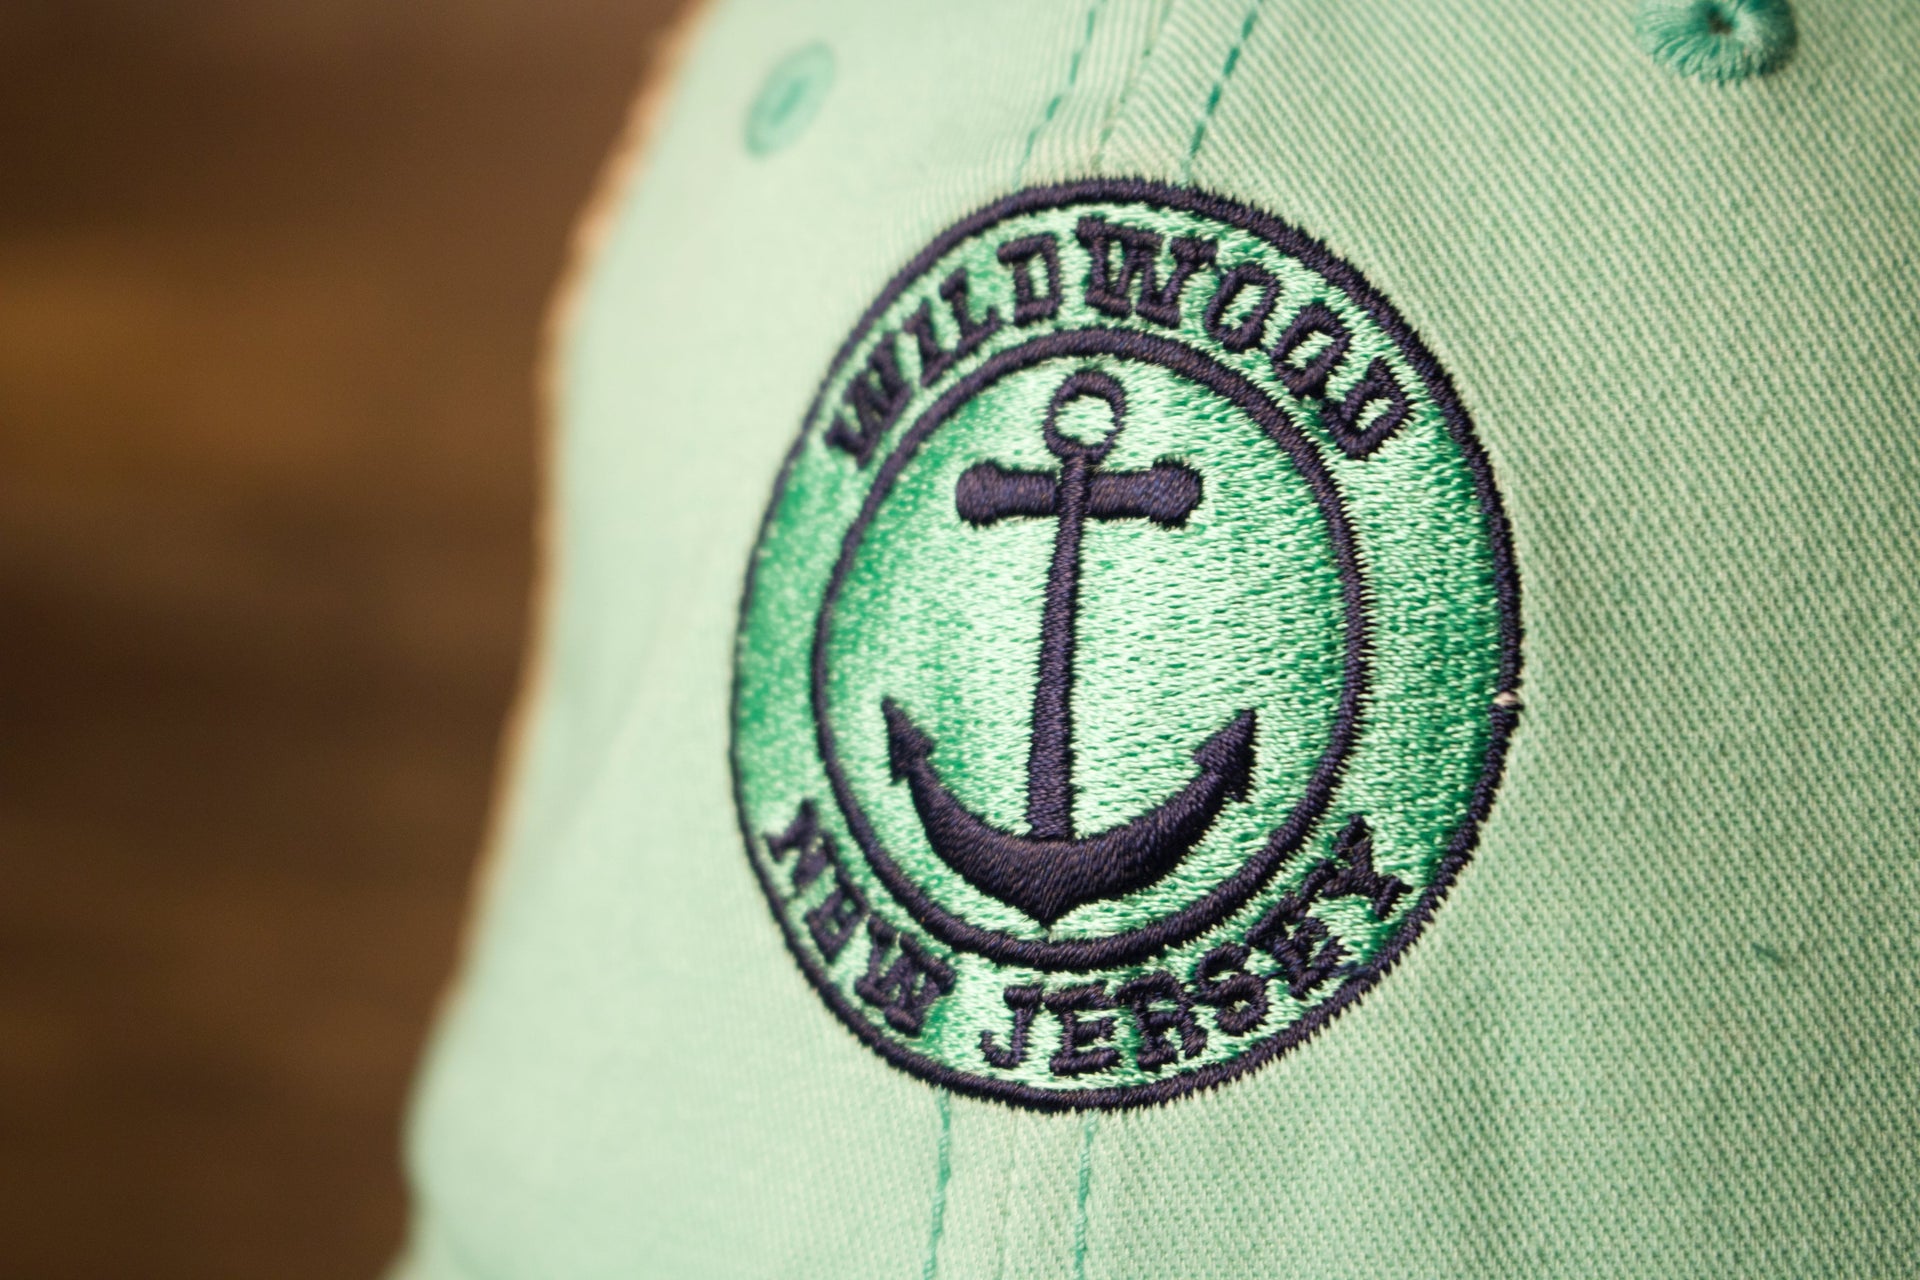 the anchor is in the middle of the text Wildwood New Jersey Mint Green / Khaki Mesh-Back Trucker Hat